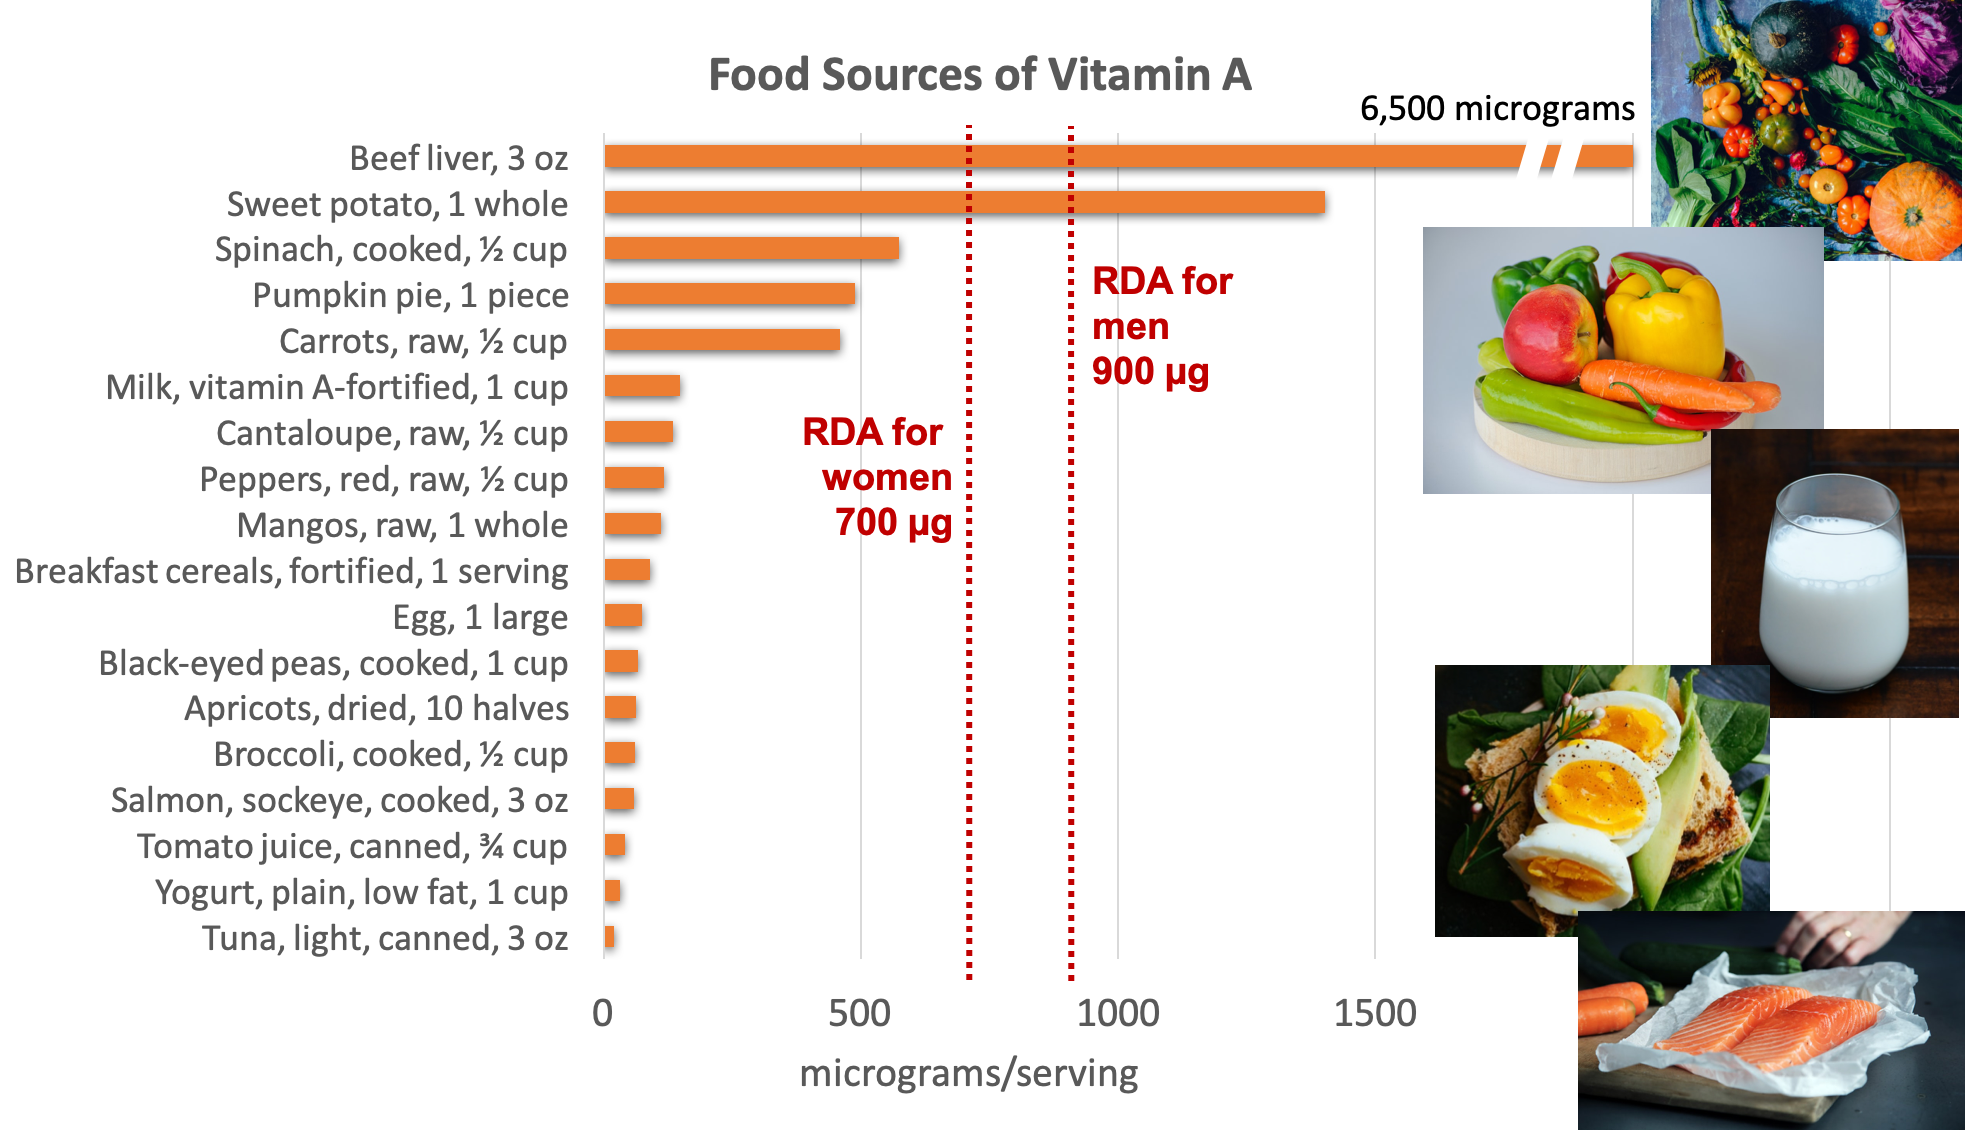 Bar graph showing dietary sources of vitamin A compared with the RDA for women of 700 micrograms and for men of 900 micrograms per day. Top sources include beef liver, sweet potato, spinach, pumpkin pie, carrots, milk, eggs, fish, and other fruits and vegetables.